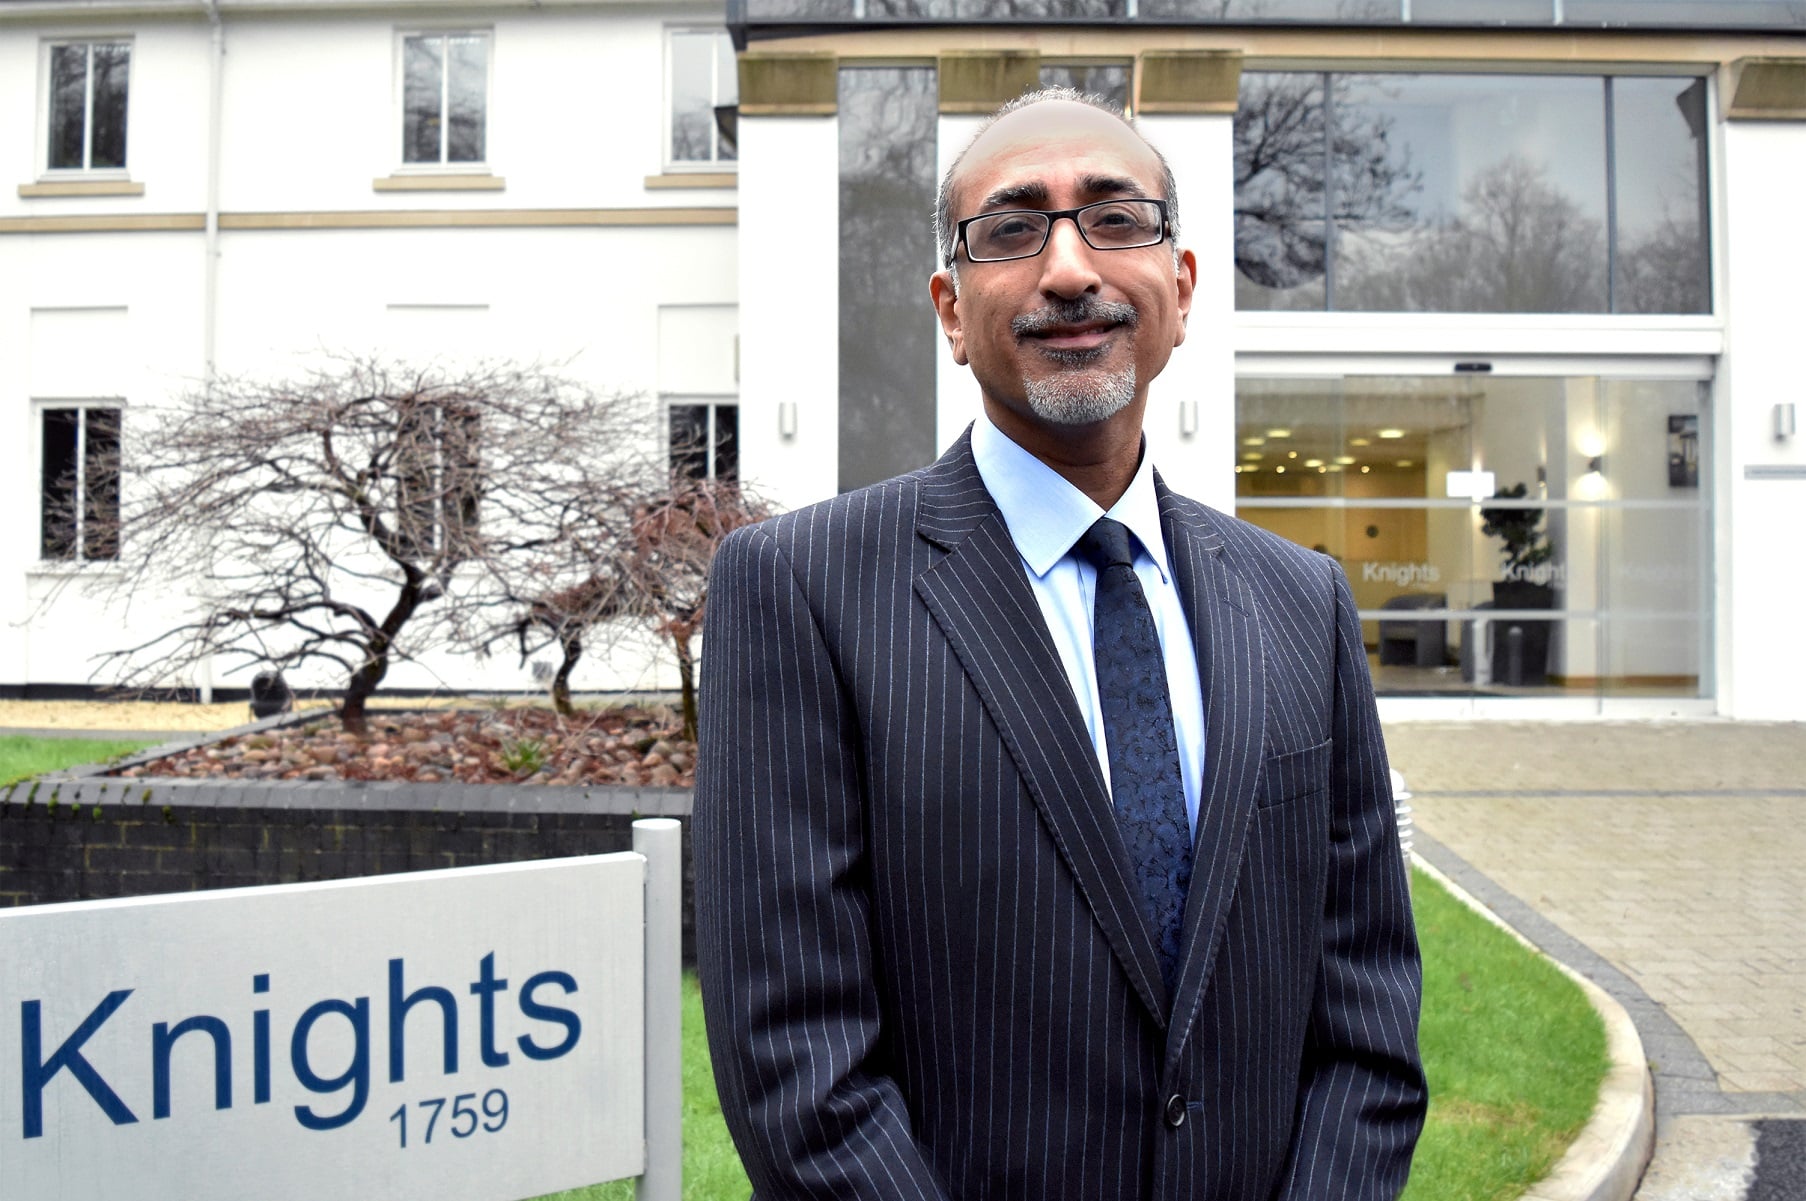 One of the region's most highly-regarded lawyers, Zaf Bashir, joins Knights Professional Services